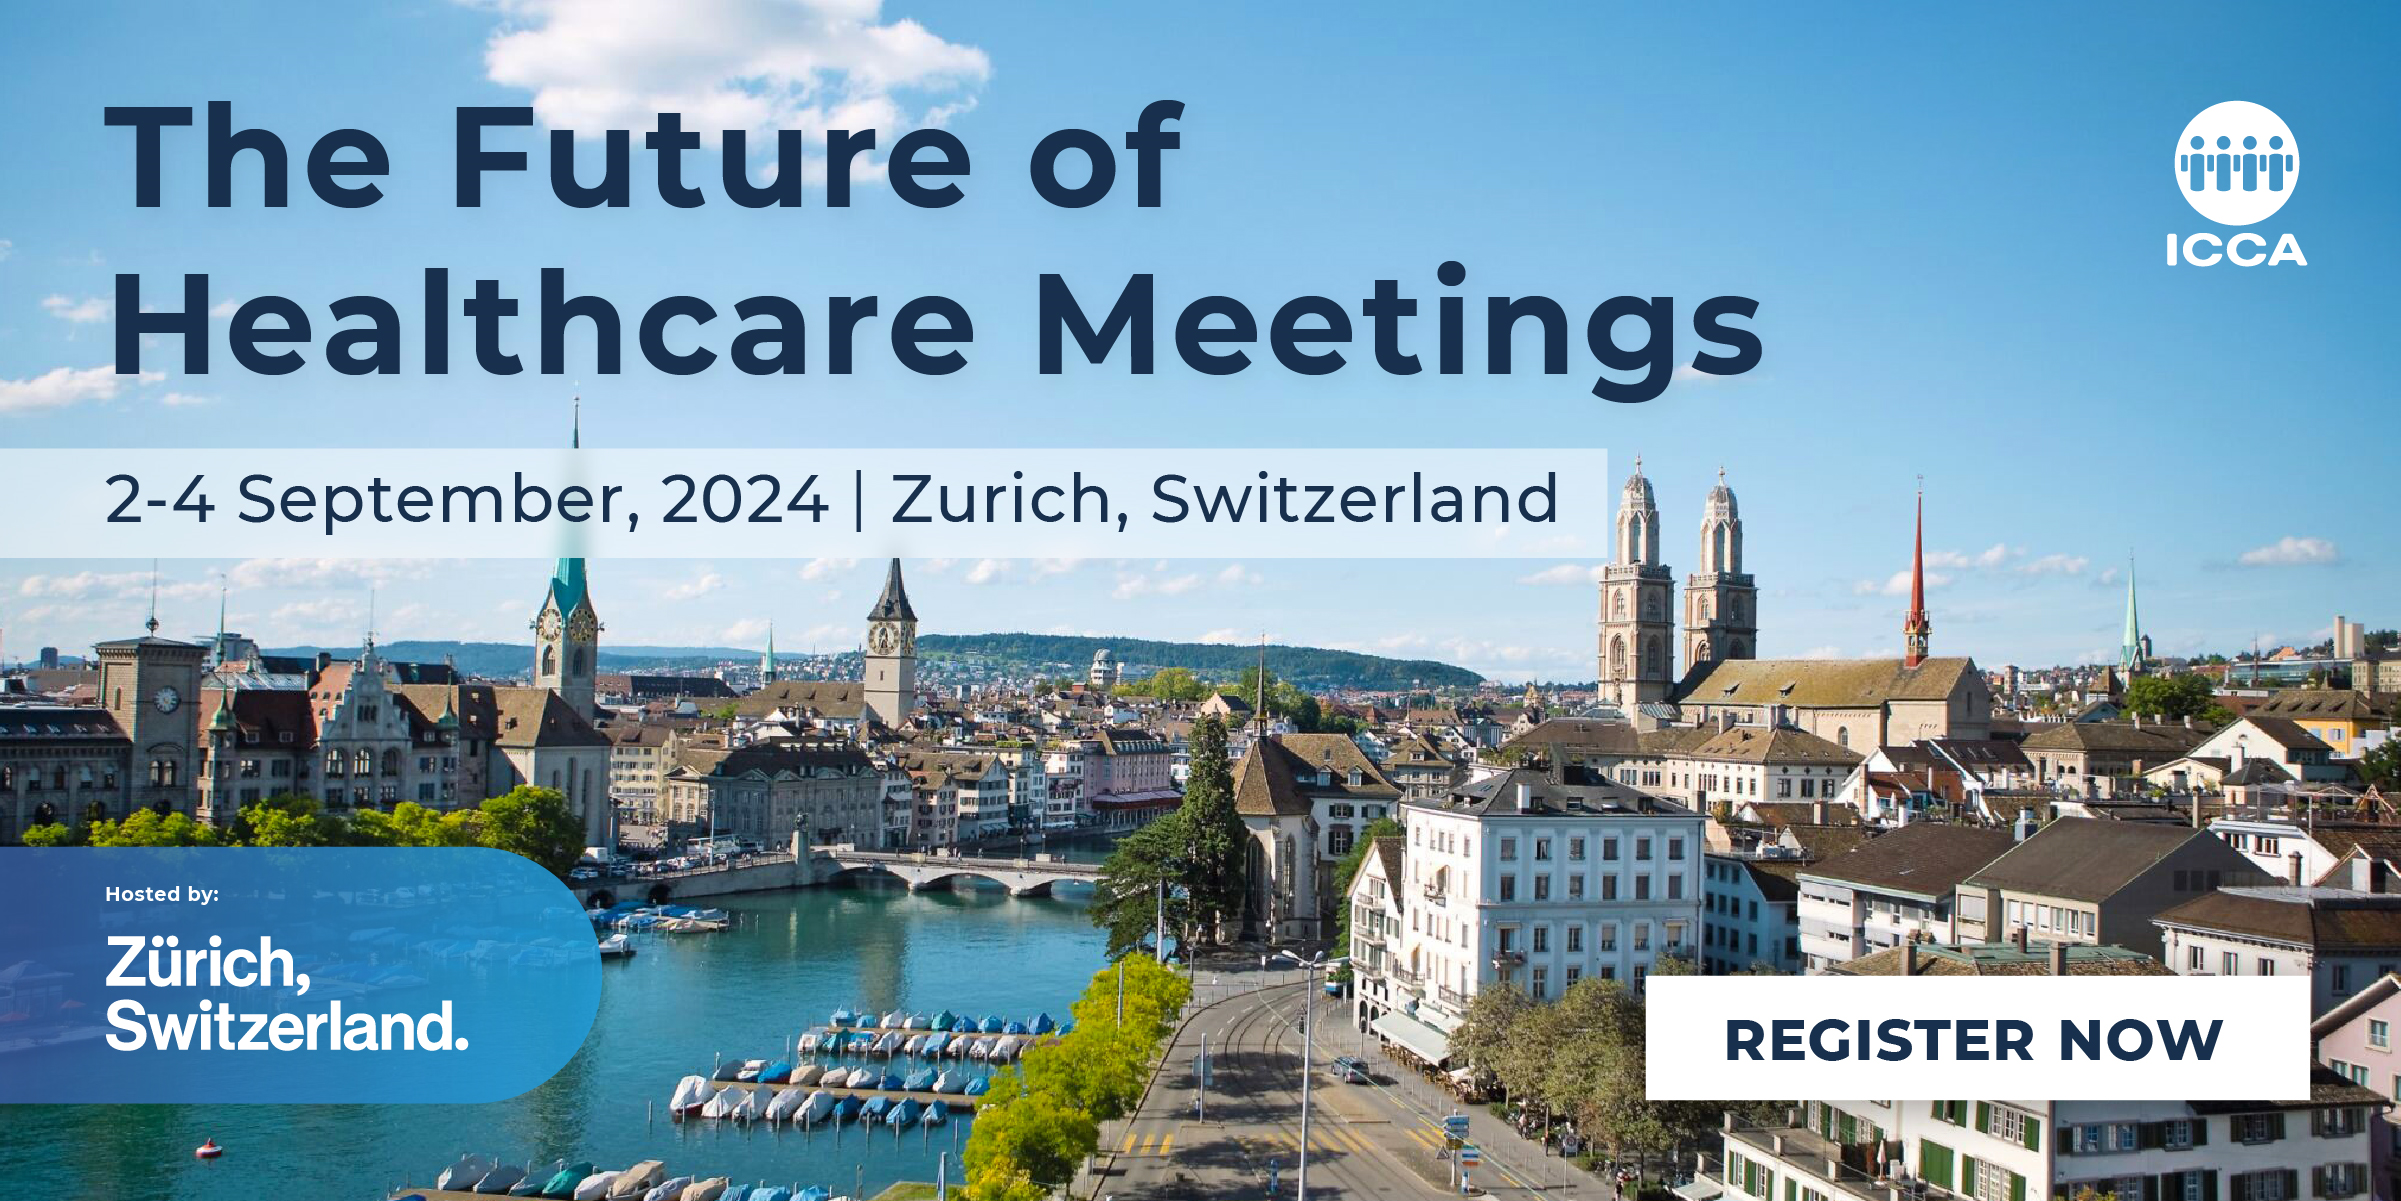 The Future of Healthcare Meetings ICCA